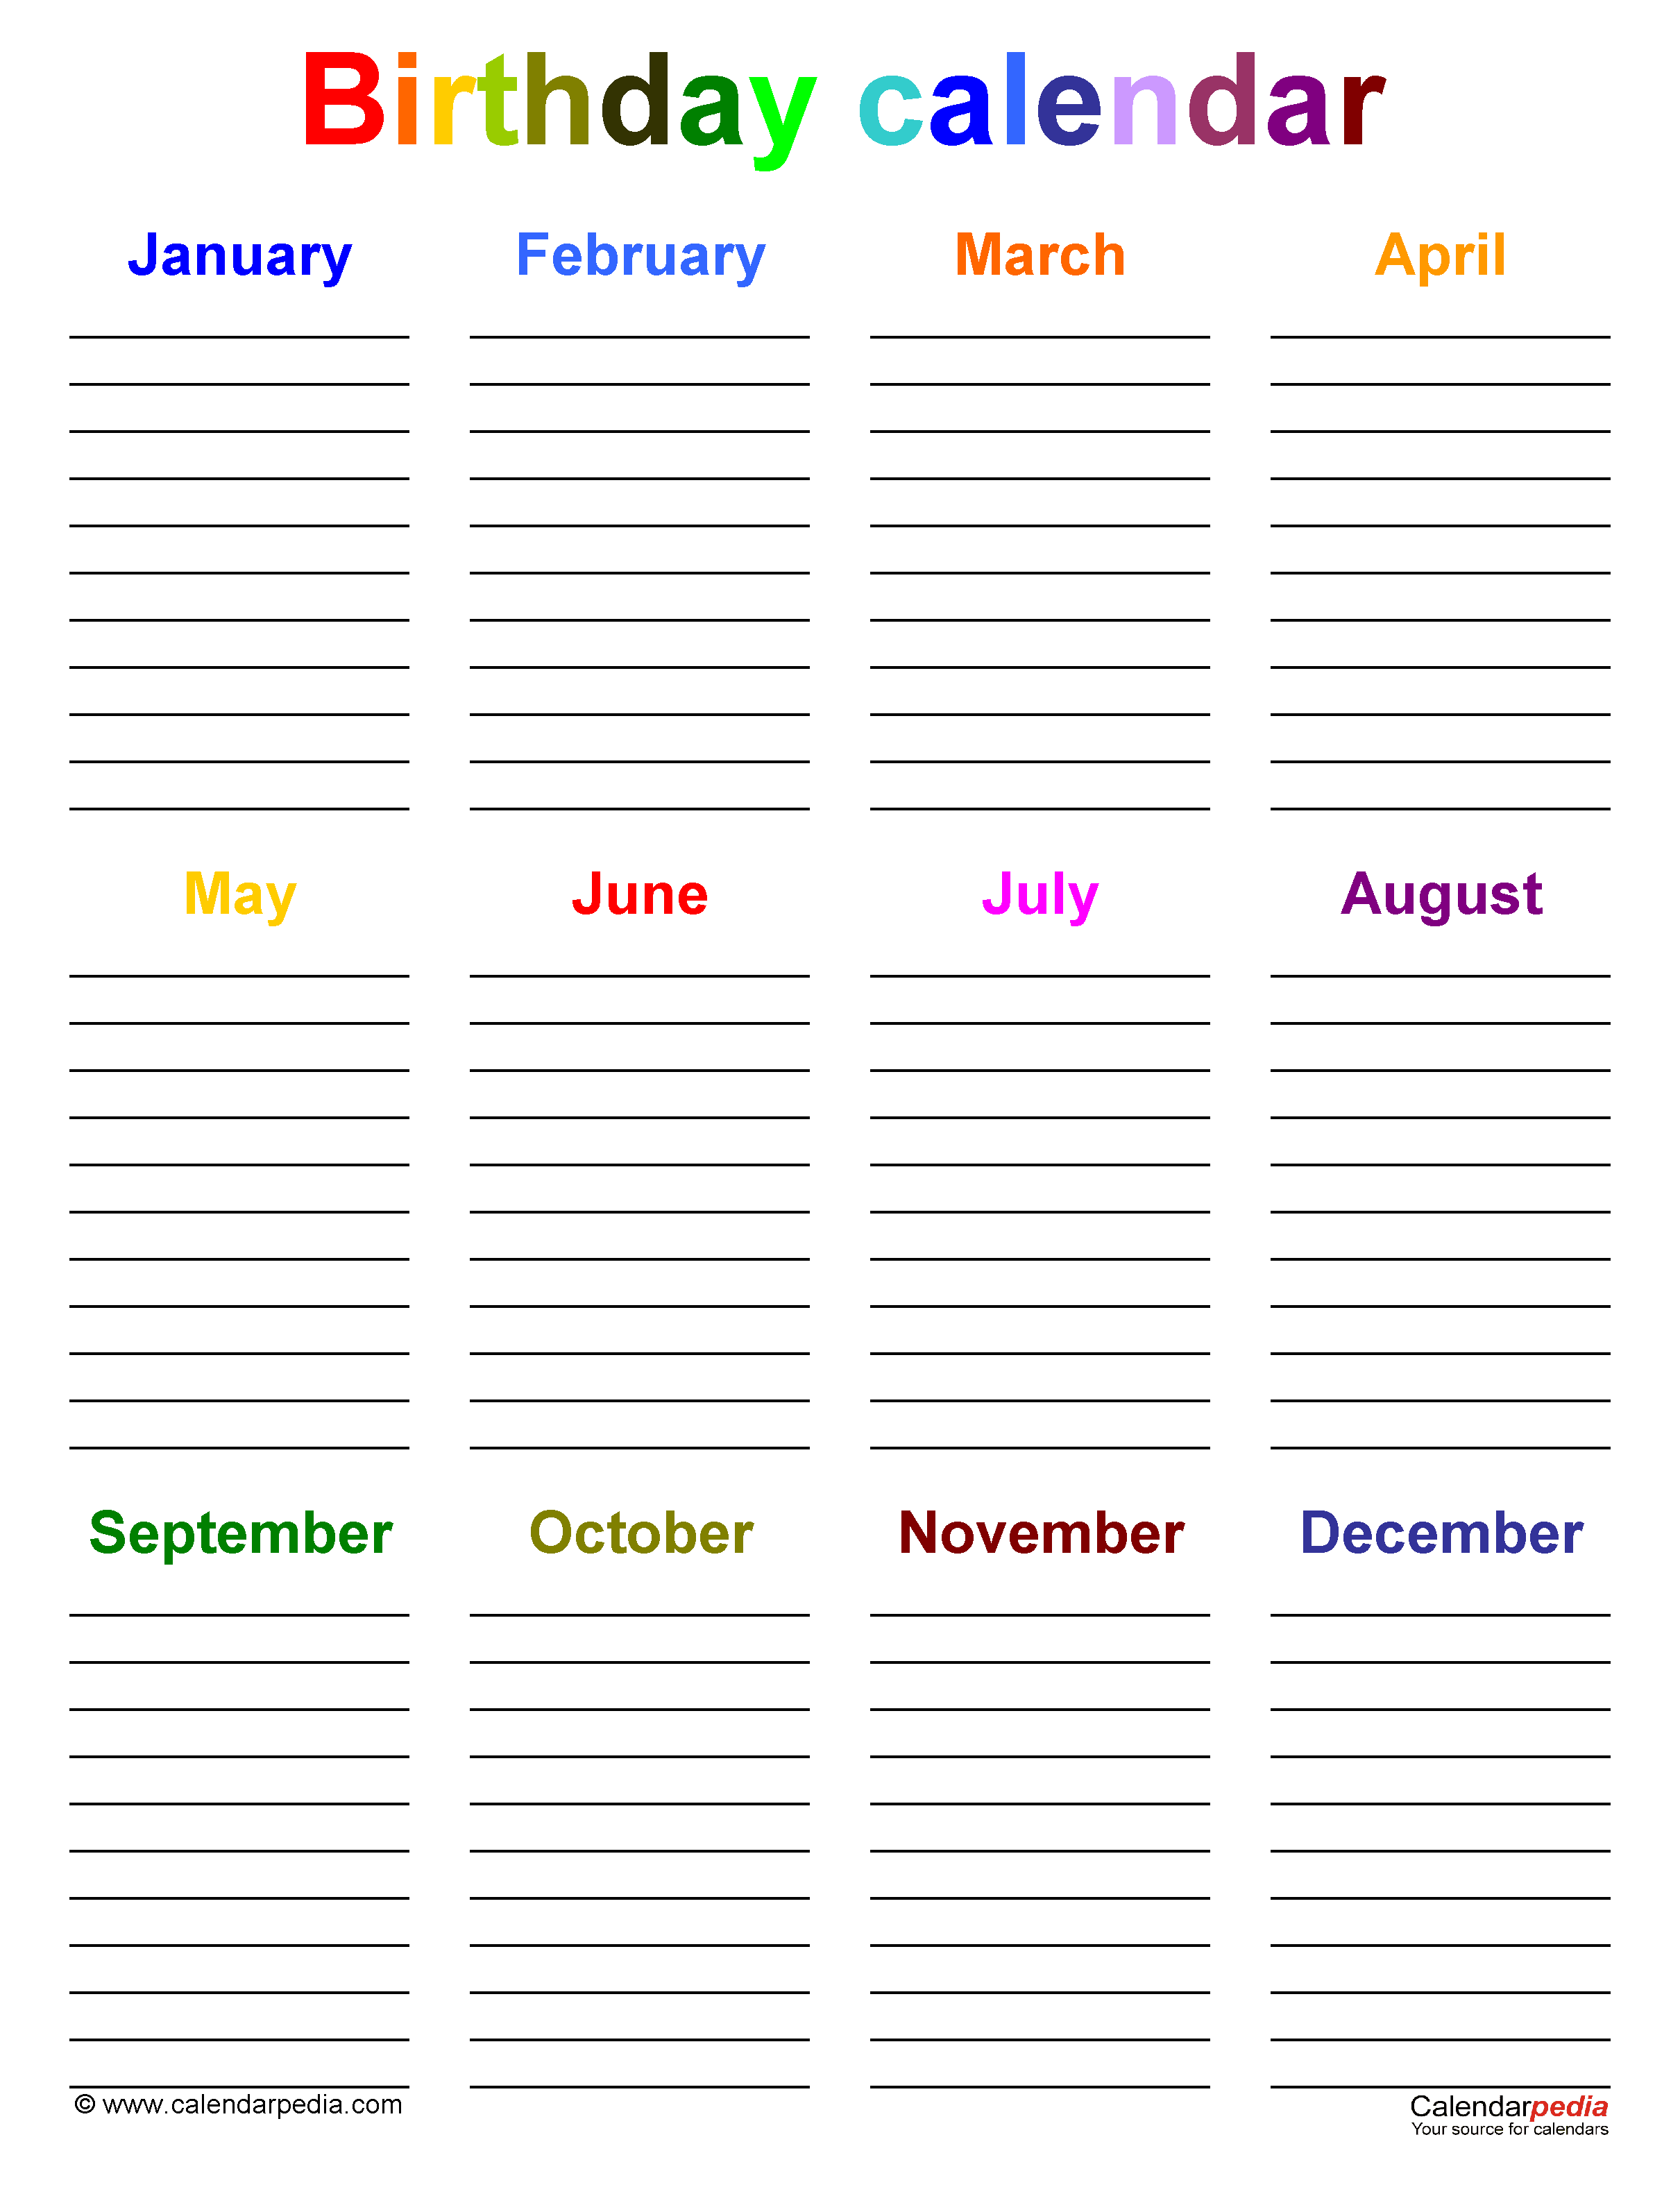 free birthday calendar for the workplace 46